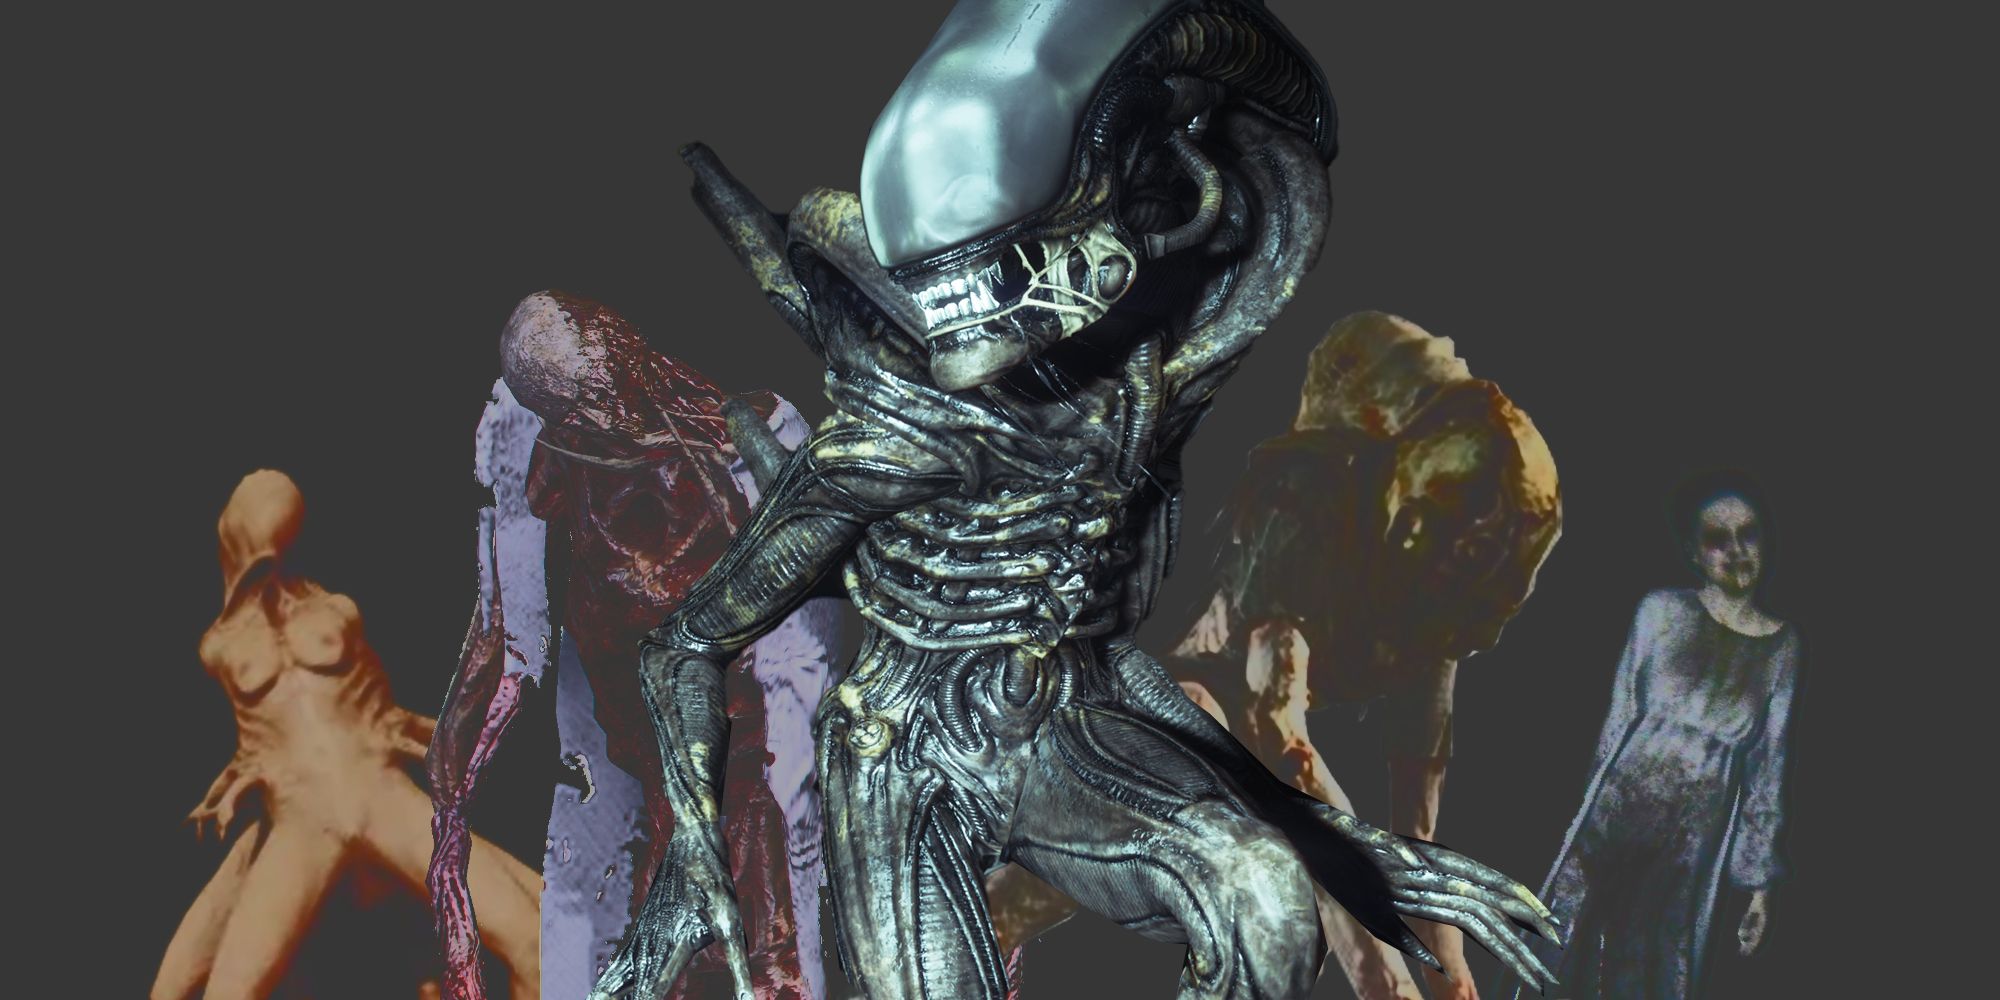 dead space baby monsters